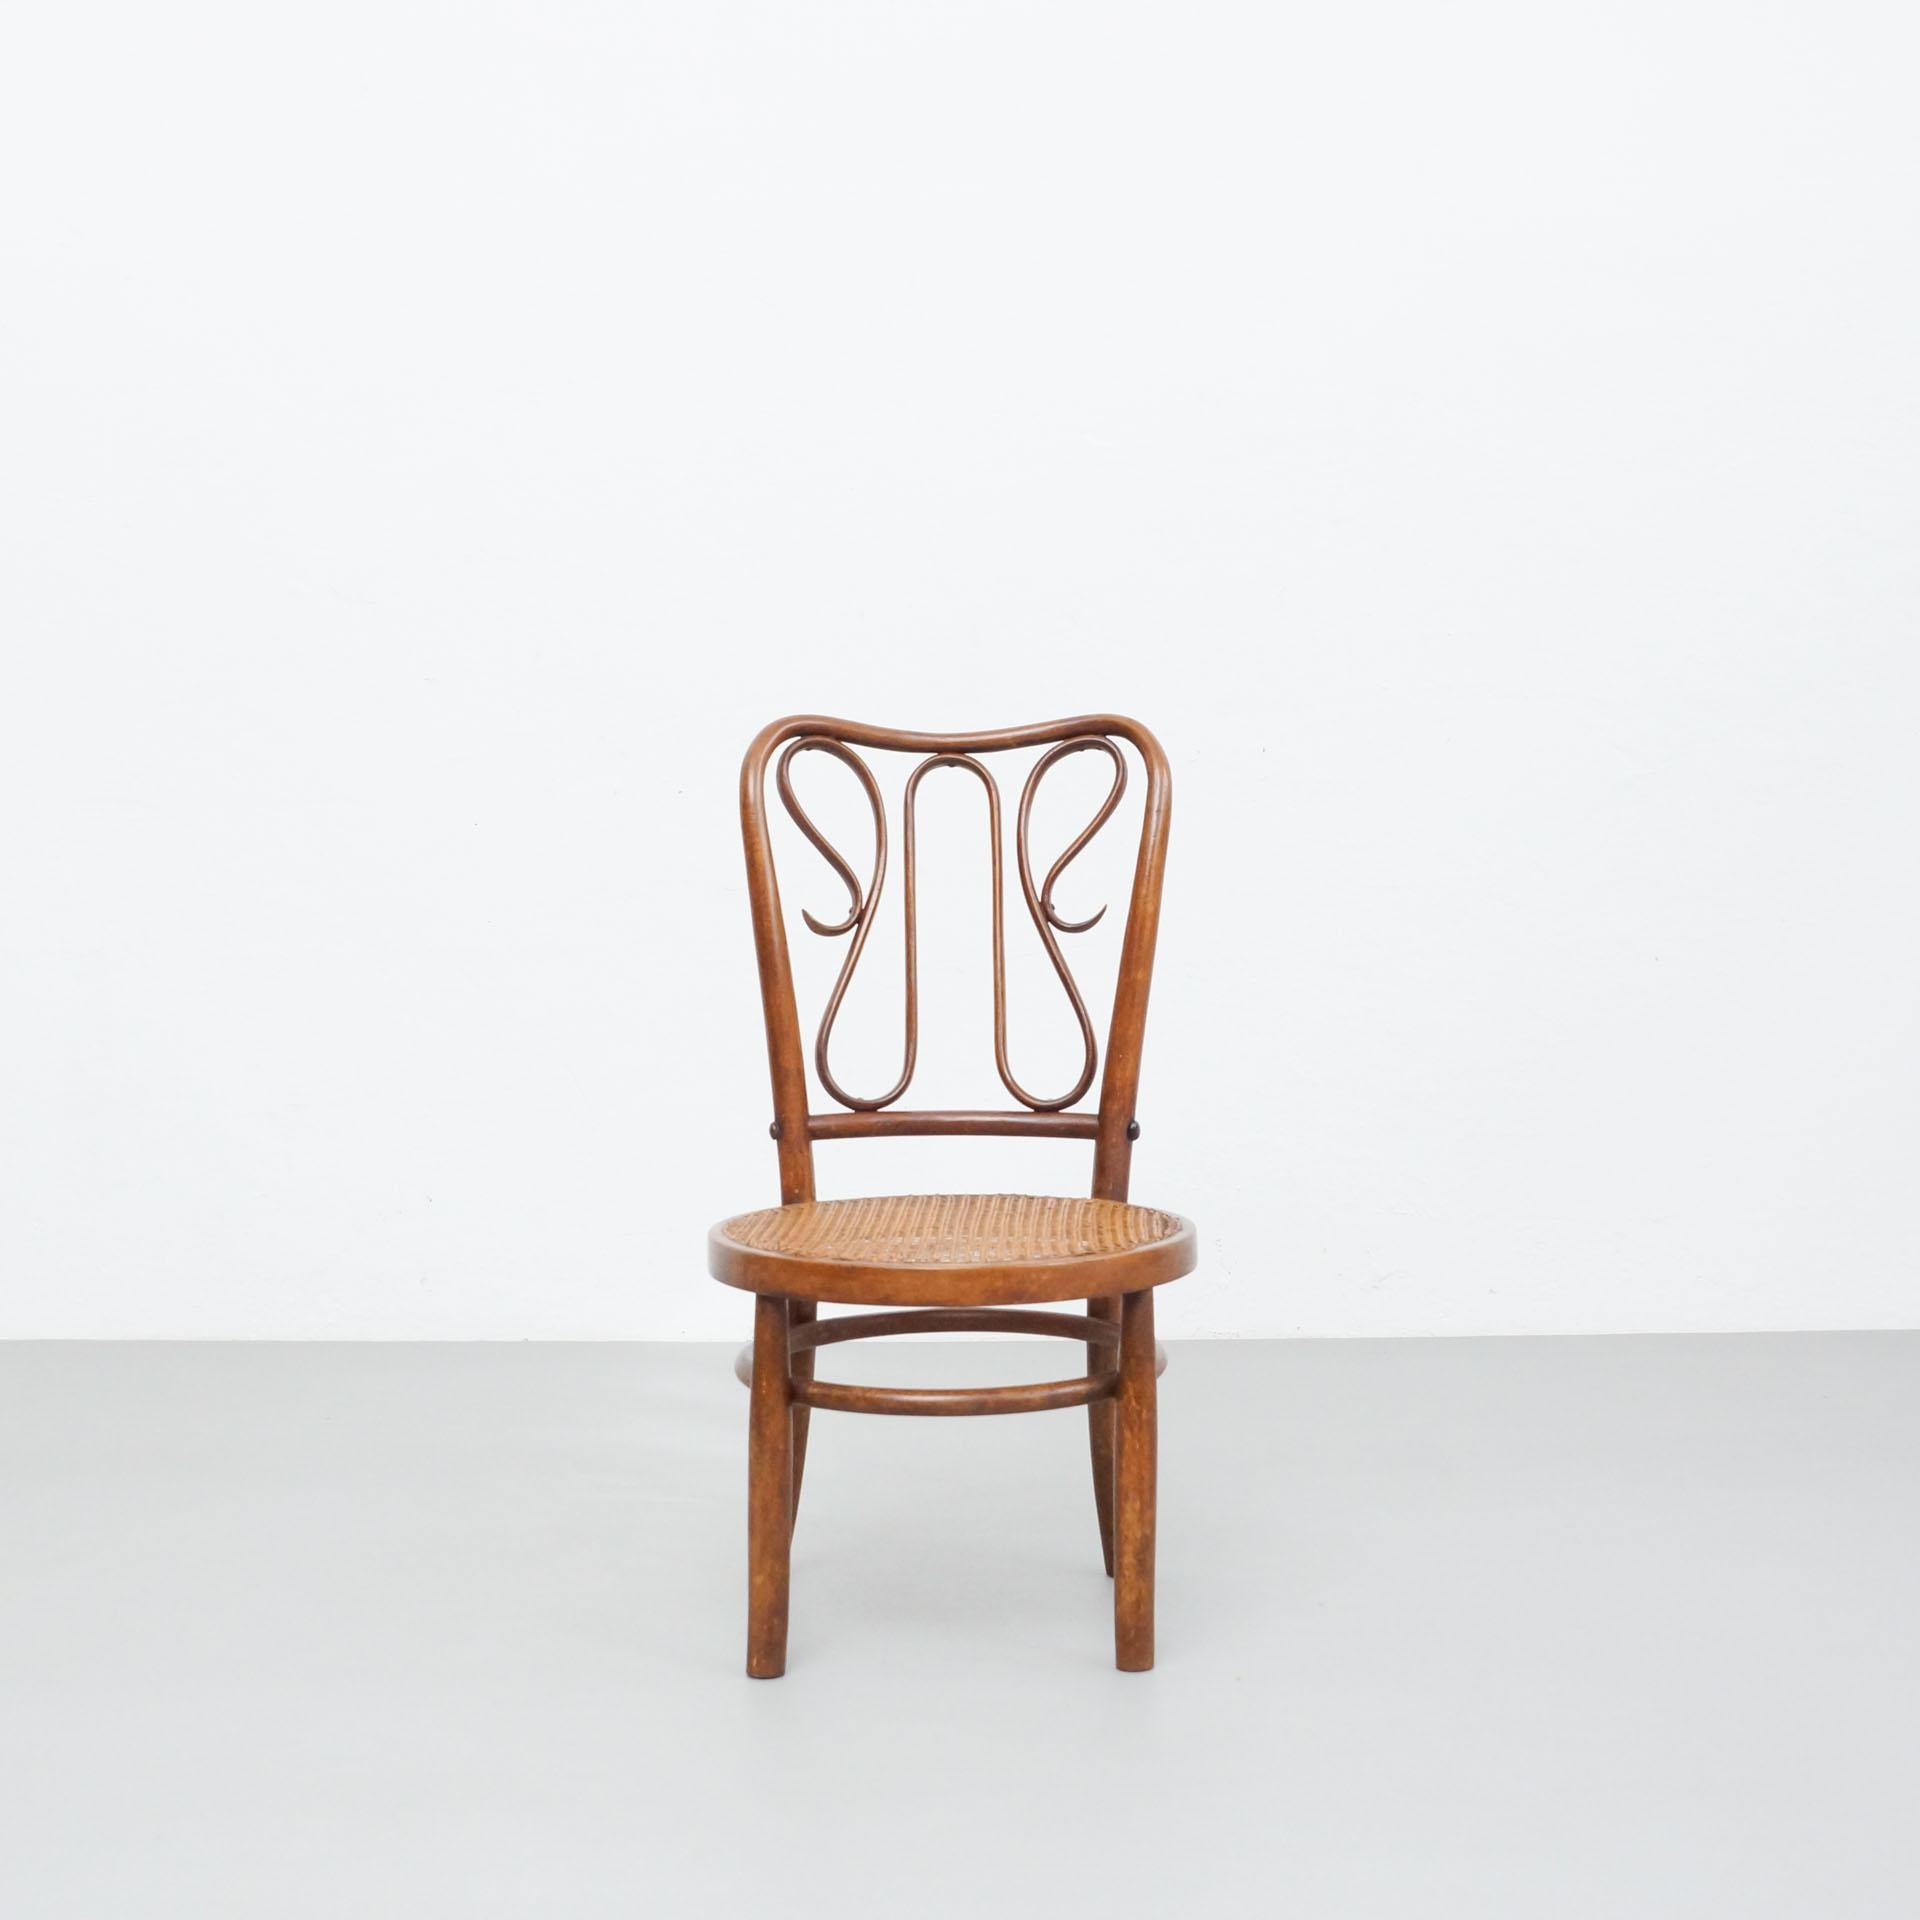 Bentwood chair by unknown designer and manufacturer in the style of Thonet.
Made in France, circa 1940.

In original condition with minor wear consistent with age and use, preserving a beautiful